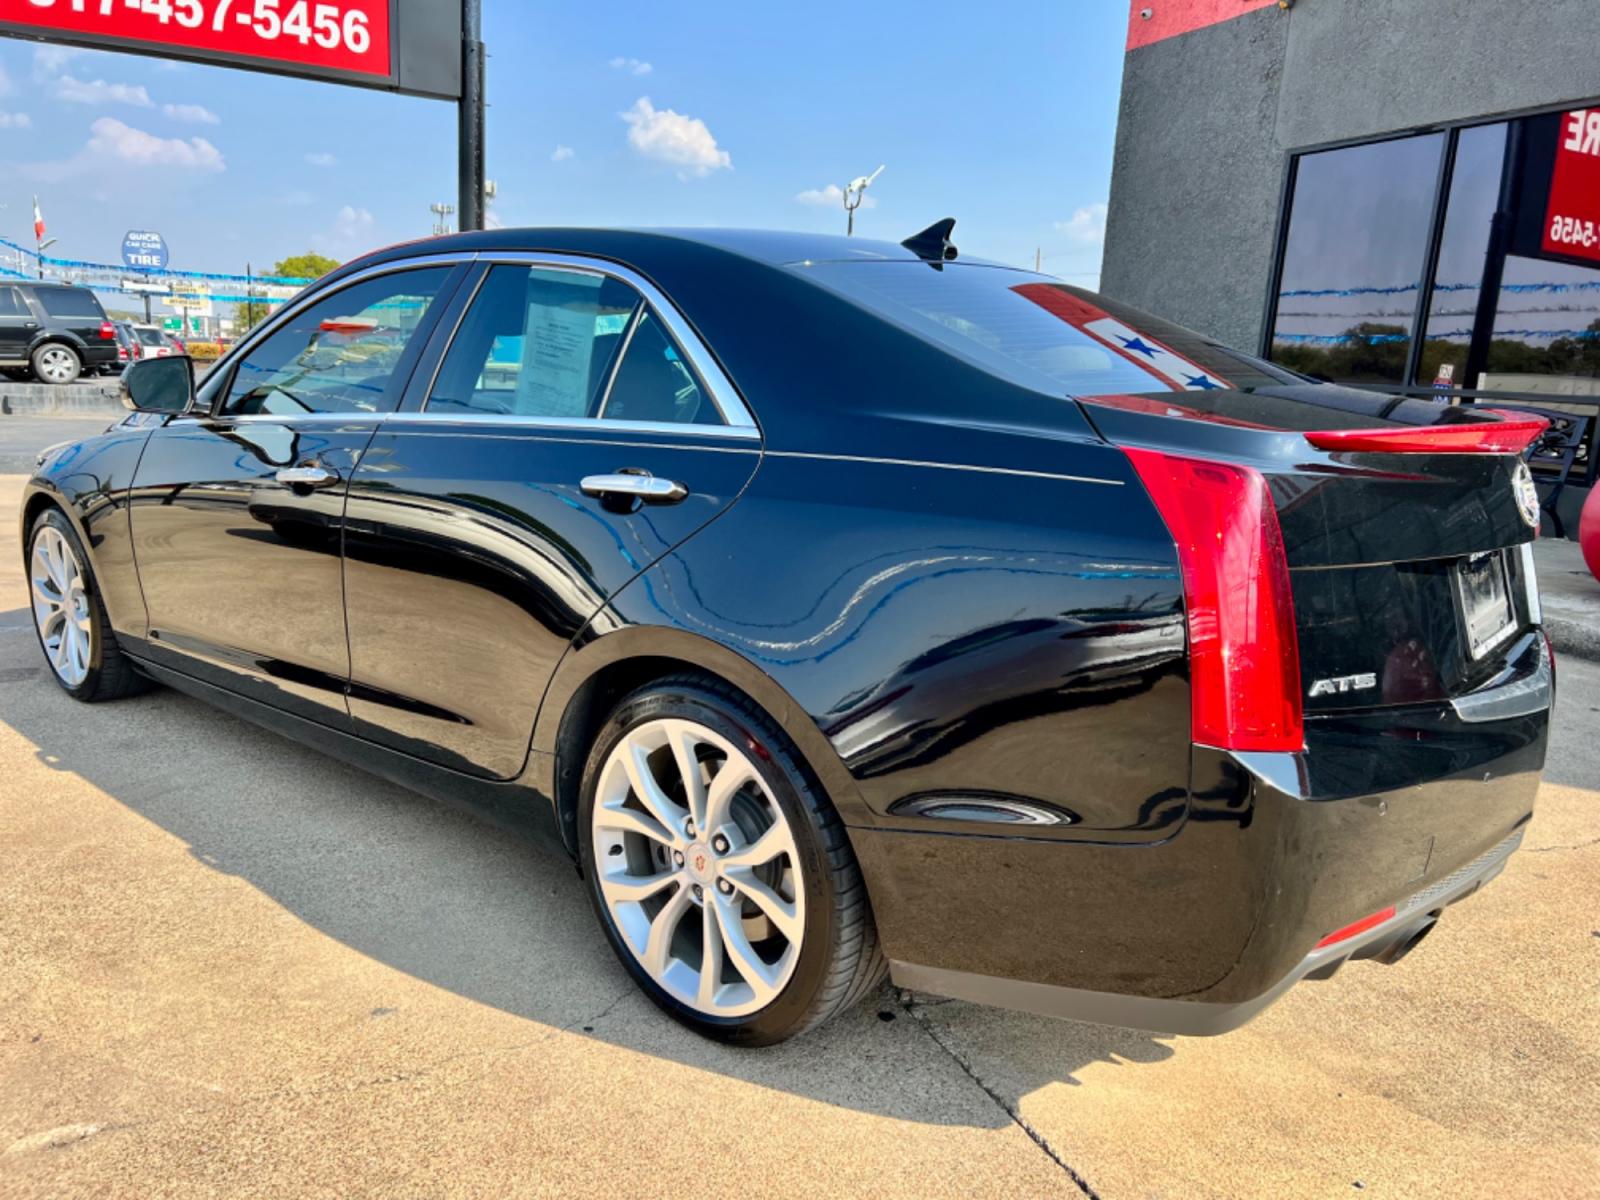 2013 BLACK CADILLAC ATS (1G6AC5SX1D0) , located at 5900 E. Lancaster Ave., Fort Worth, TX, 76112, (817) 457-5456, 0.000000, 0.000000 - This is a 2013 CADILLAC ATS 4 DOOR SEDAN that is in excellent condition. There are no dents or scratches. The interior is clean with no rips or tears or stains. All power windows, door locks and seats. Ice cold AC for those hot Texas summer days. It is equipped with a CD player, AM/FM radio, AUX por - Photo #4